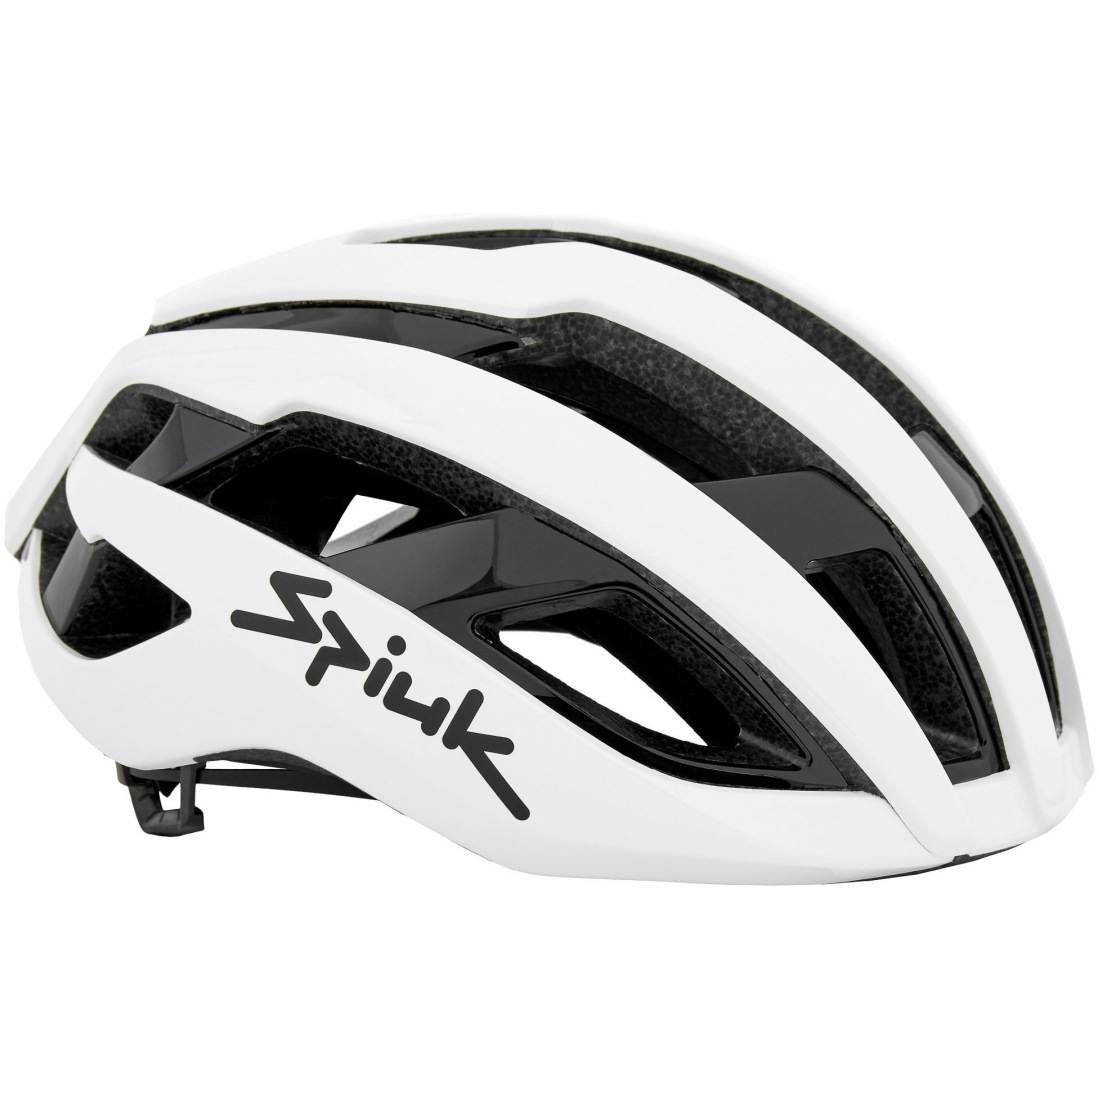 Picture of Spiuk Domo Helmet - white